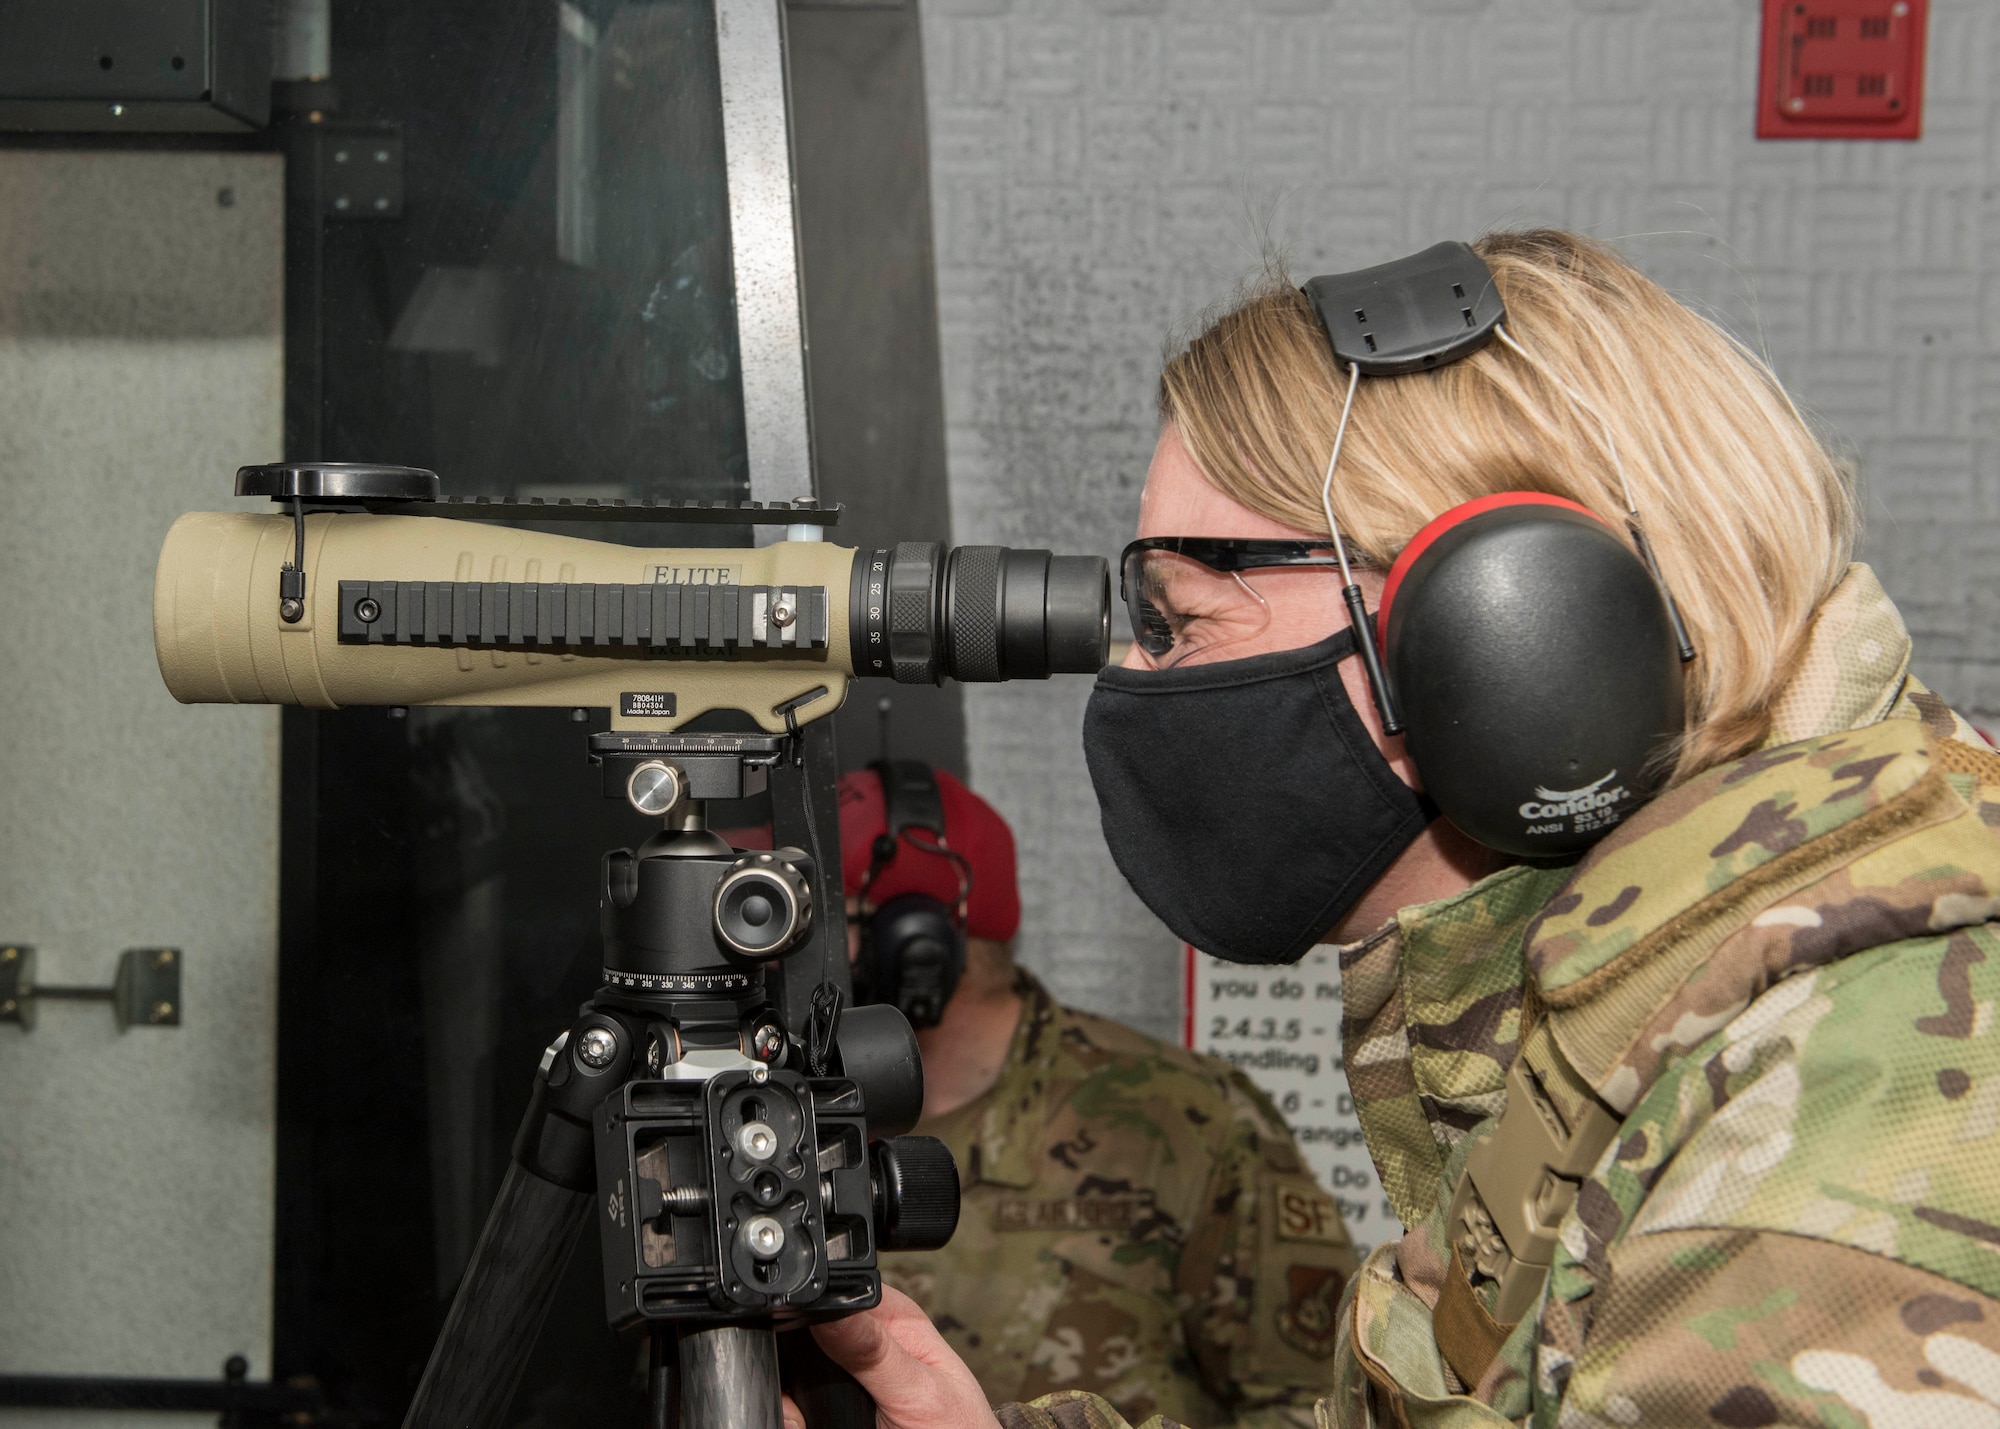 U.S. Air Force Col. Kirsten Aguilar, the Joint Base Elmendorf-Richardson and 673d Air Base Wing commander, looks through a scope during an immersion with the 673d Security Forces Squadron at JBER, Alaska, Feb. 2, 2021. The tour familiarized base leadership with the 673d SFS and its role in maintaining the safety of the JBER community and security of the installation and its resources.